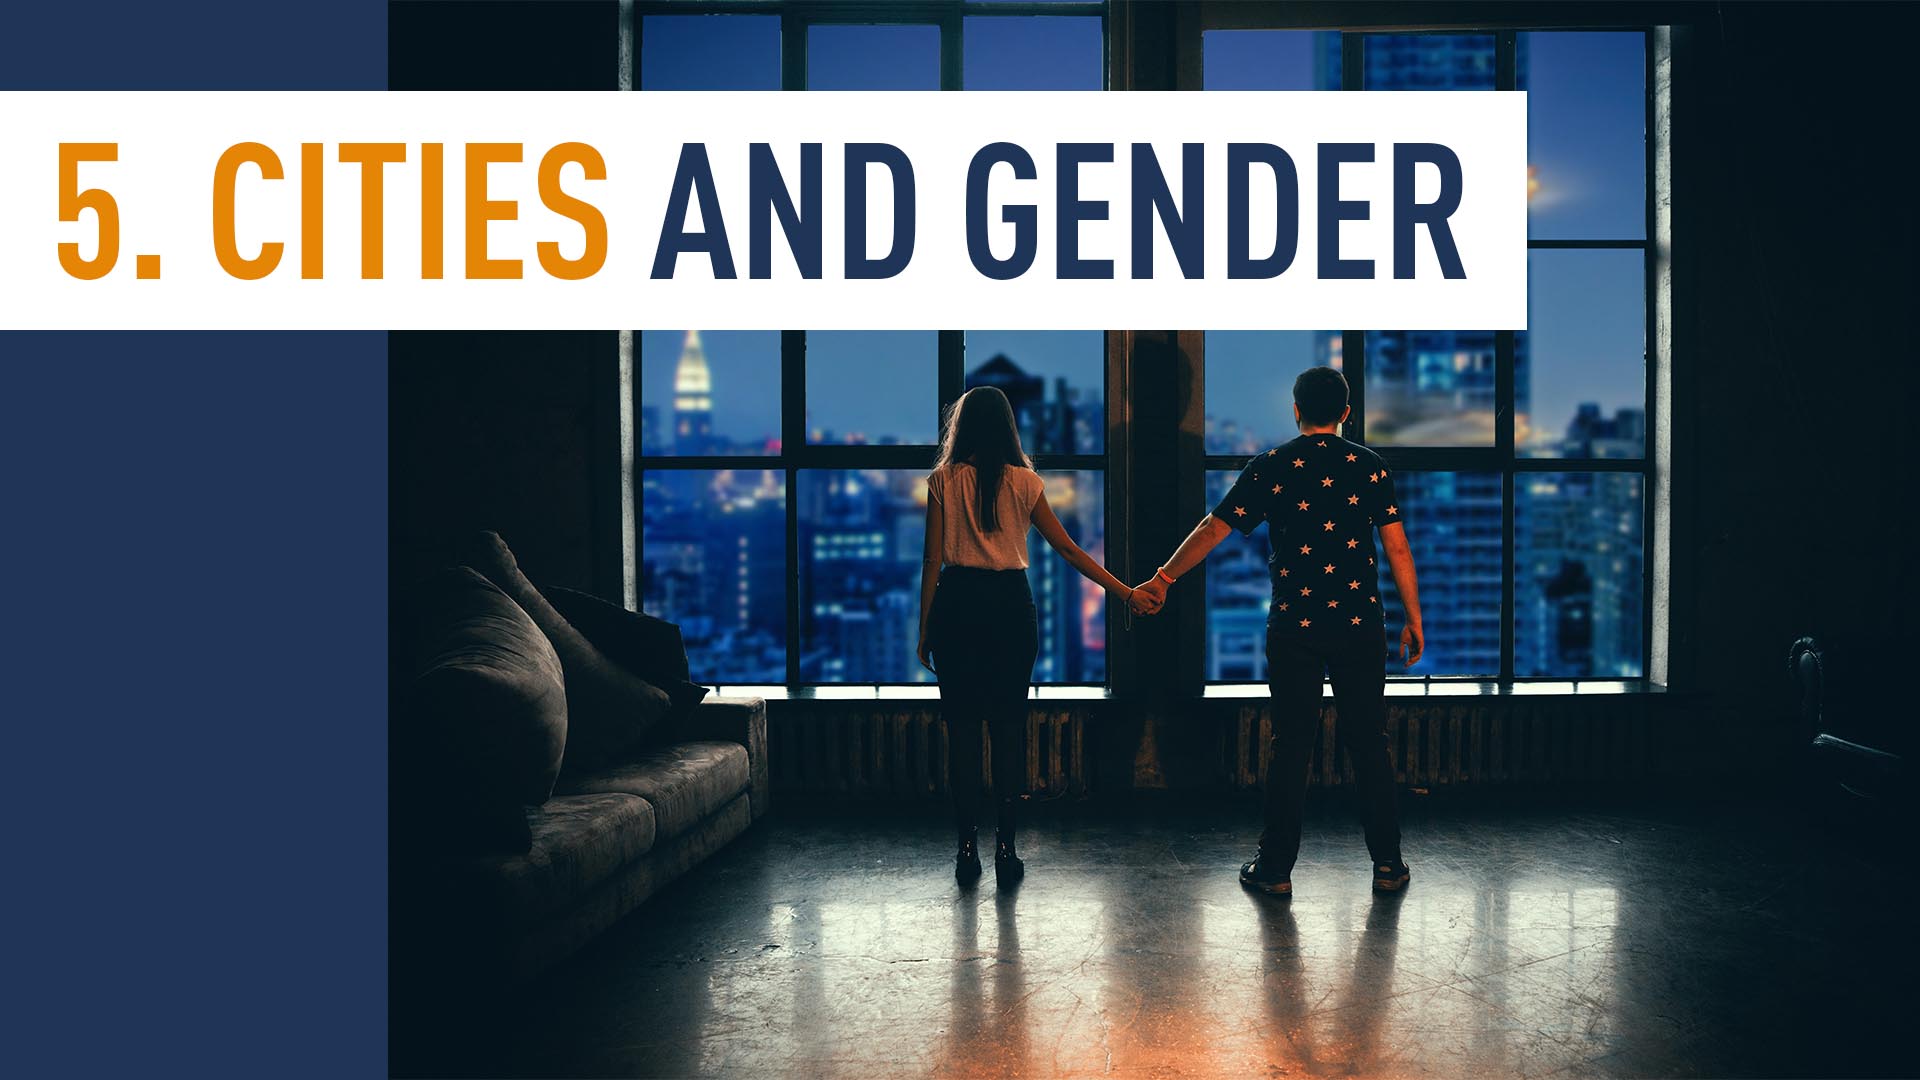 CITIES AND GENDER